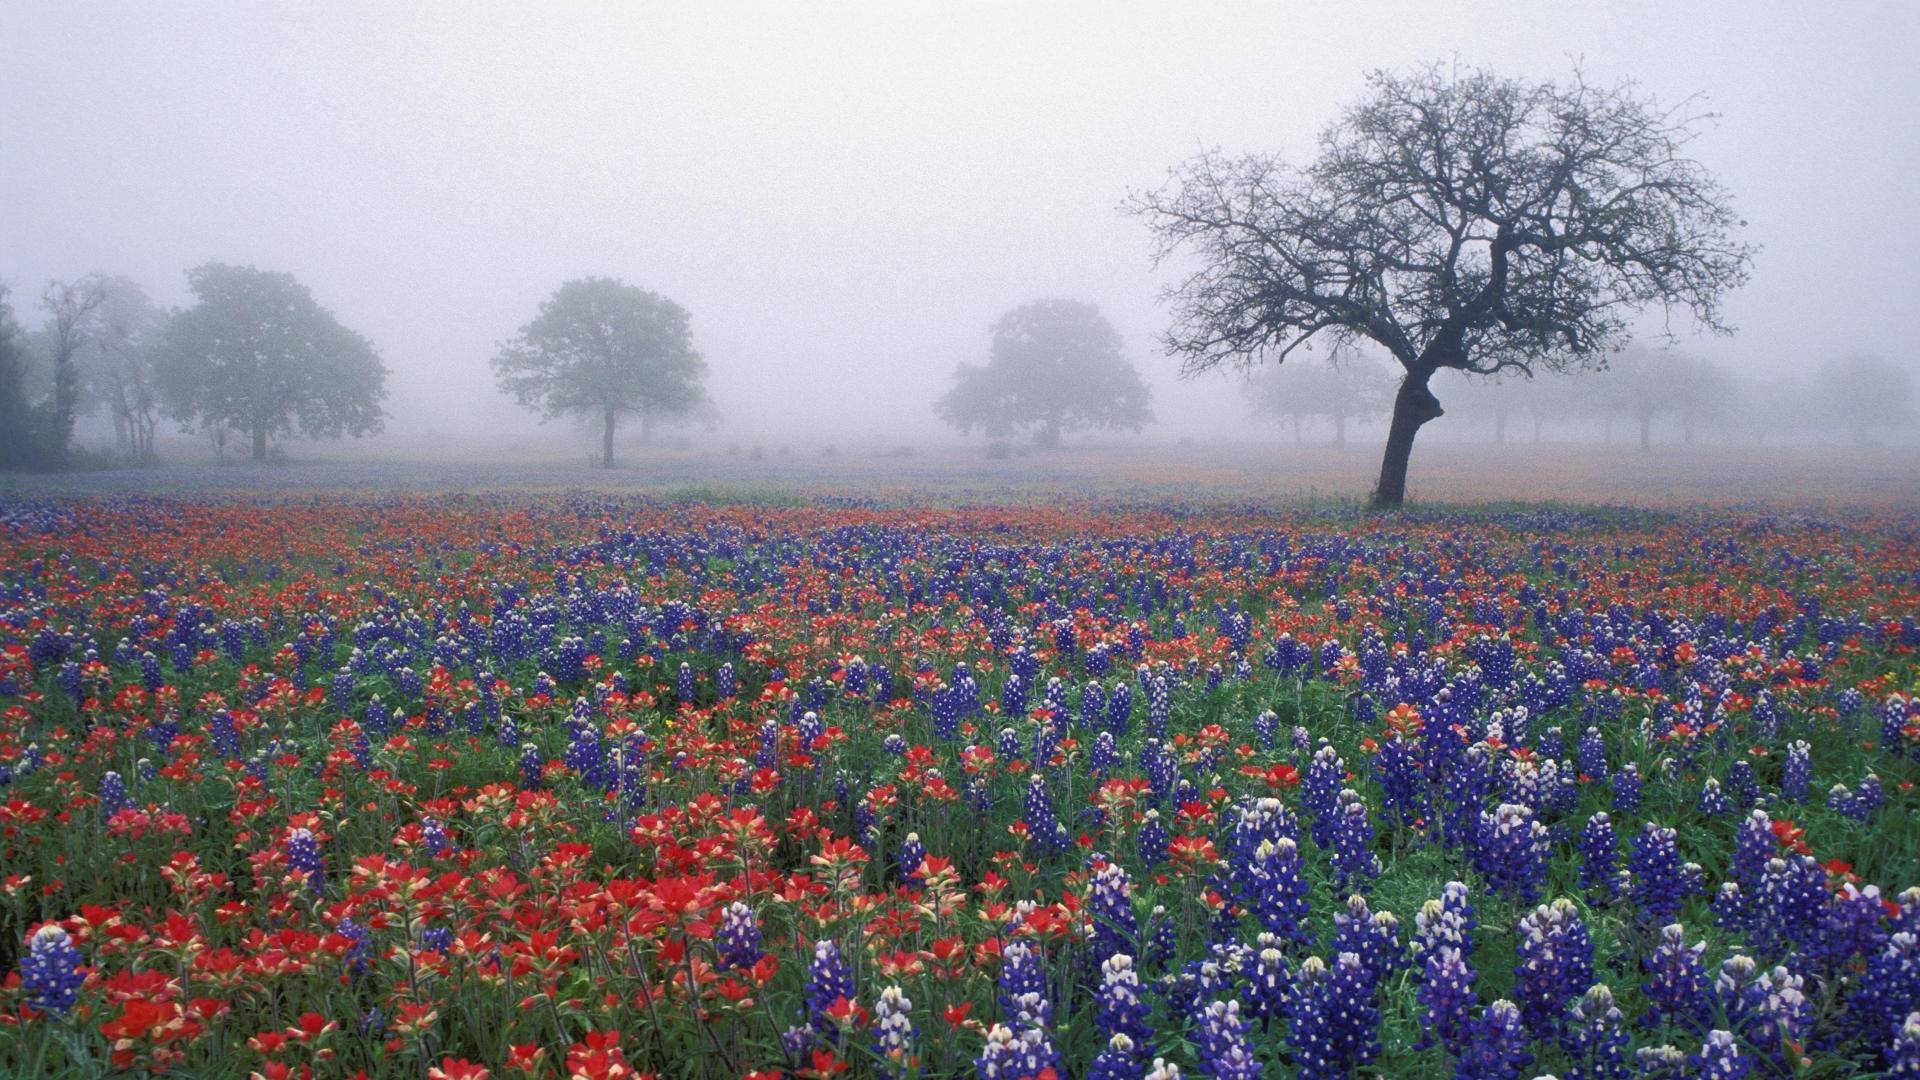 Texas Hill Country with Texas flag wallpaper, Patriotic pride, Texas beauty, Frontier spirit, 1920x1080 Full HD Desktop